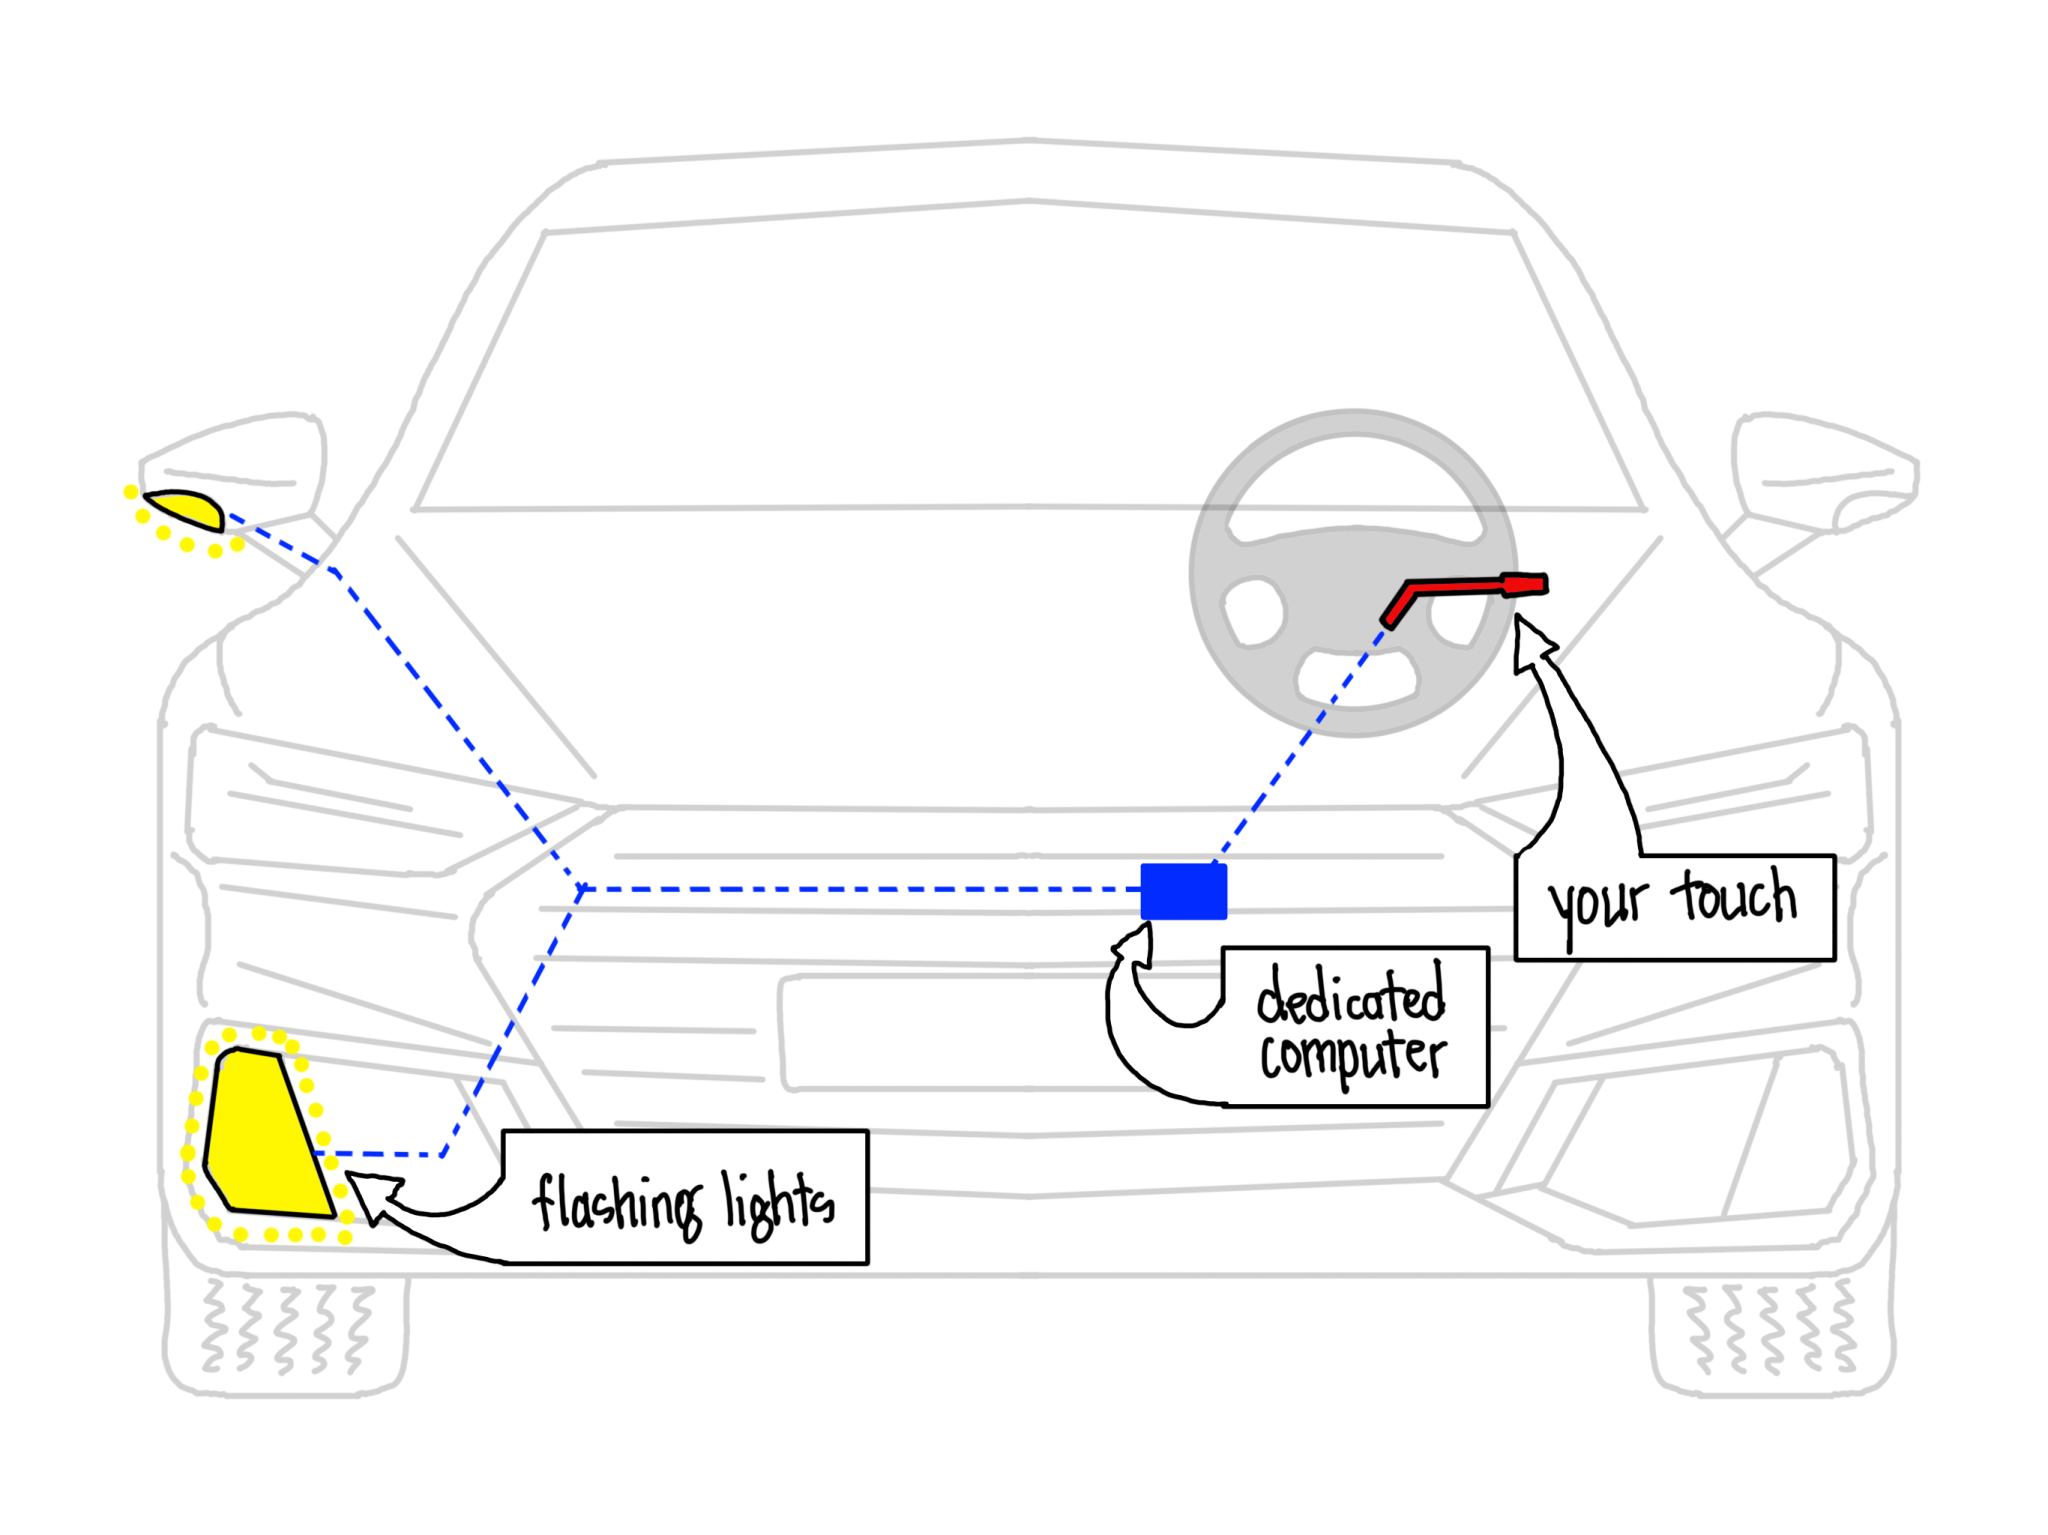 An illustration of a car with the headlight, computer, and blinker handle labelled.